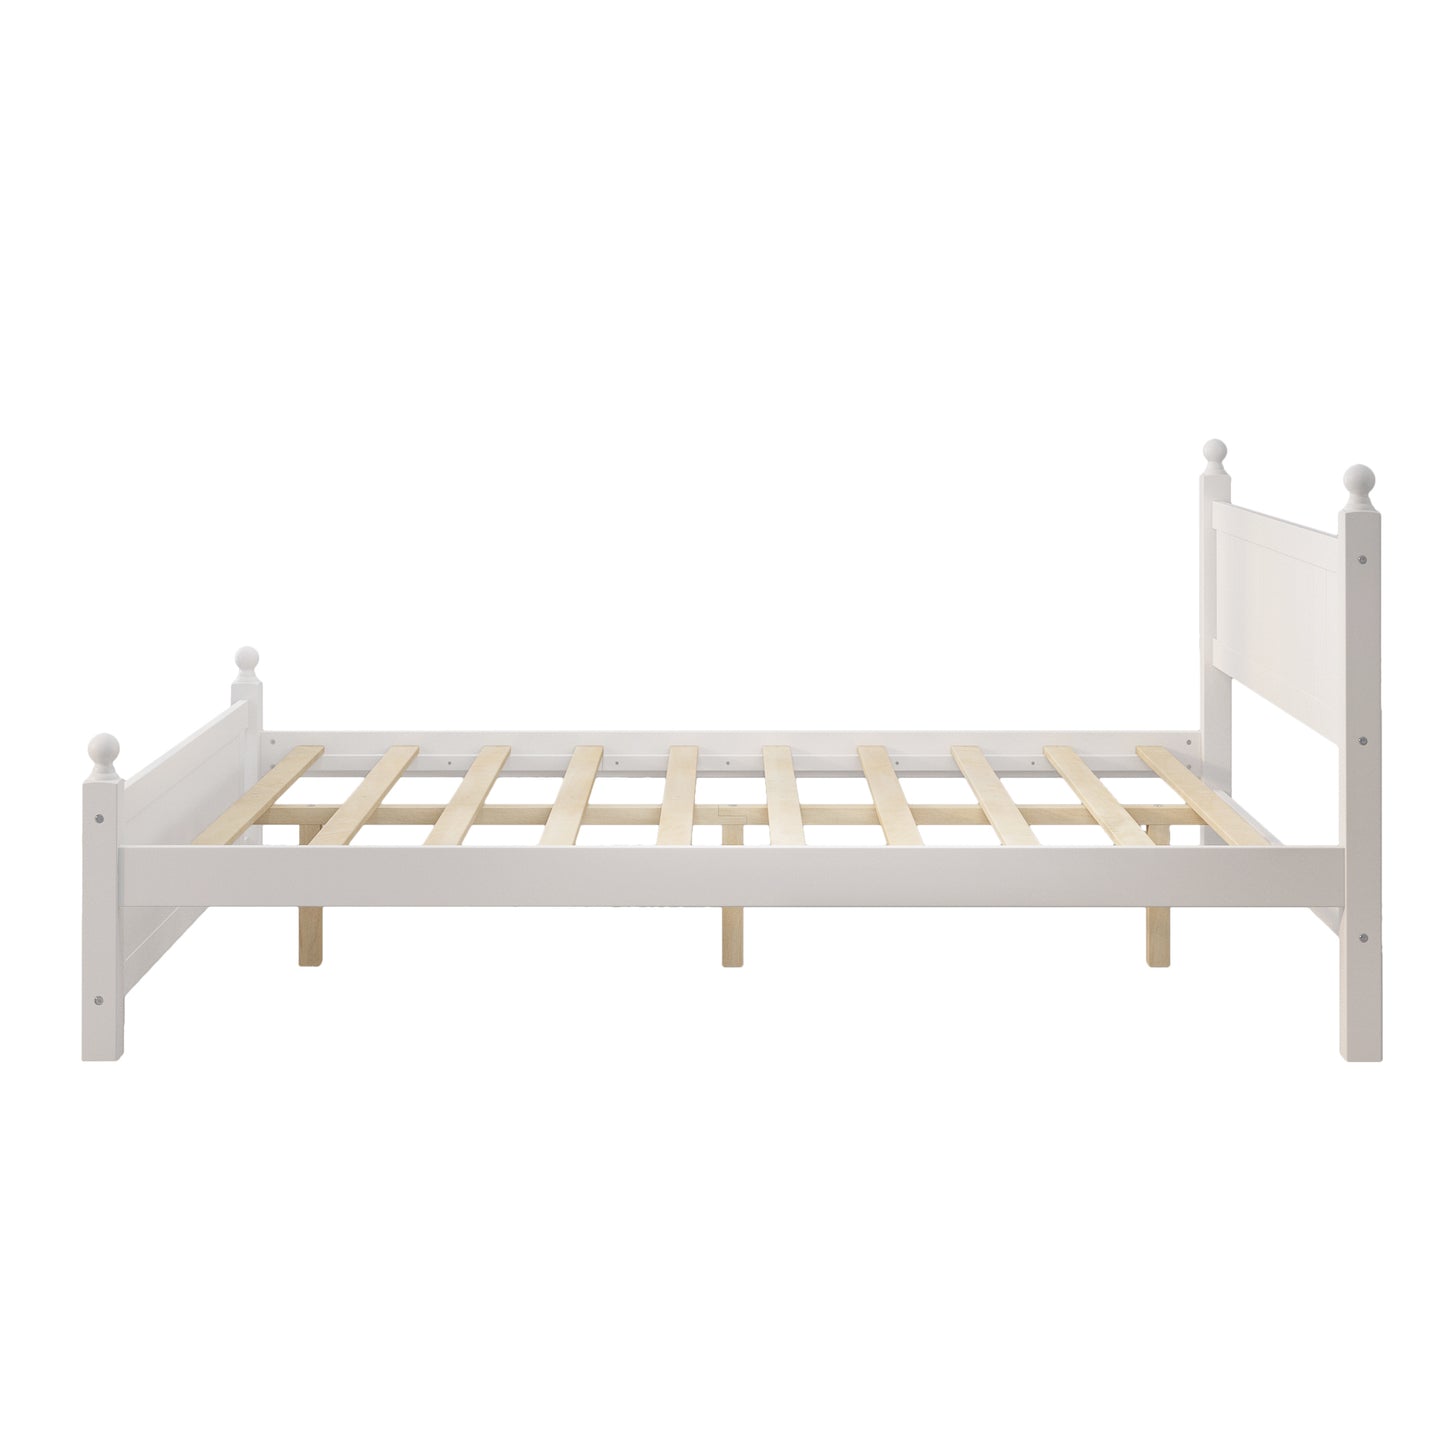 Queen Size Solid Wood Platform Bed Frame for Kids, Teens, Adults, No Need Box Spring, White